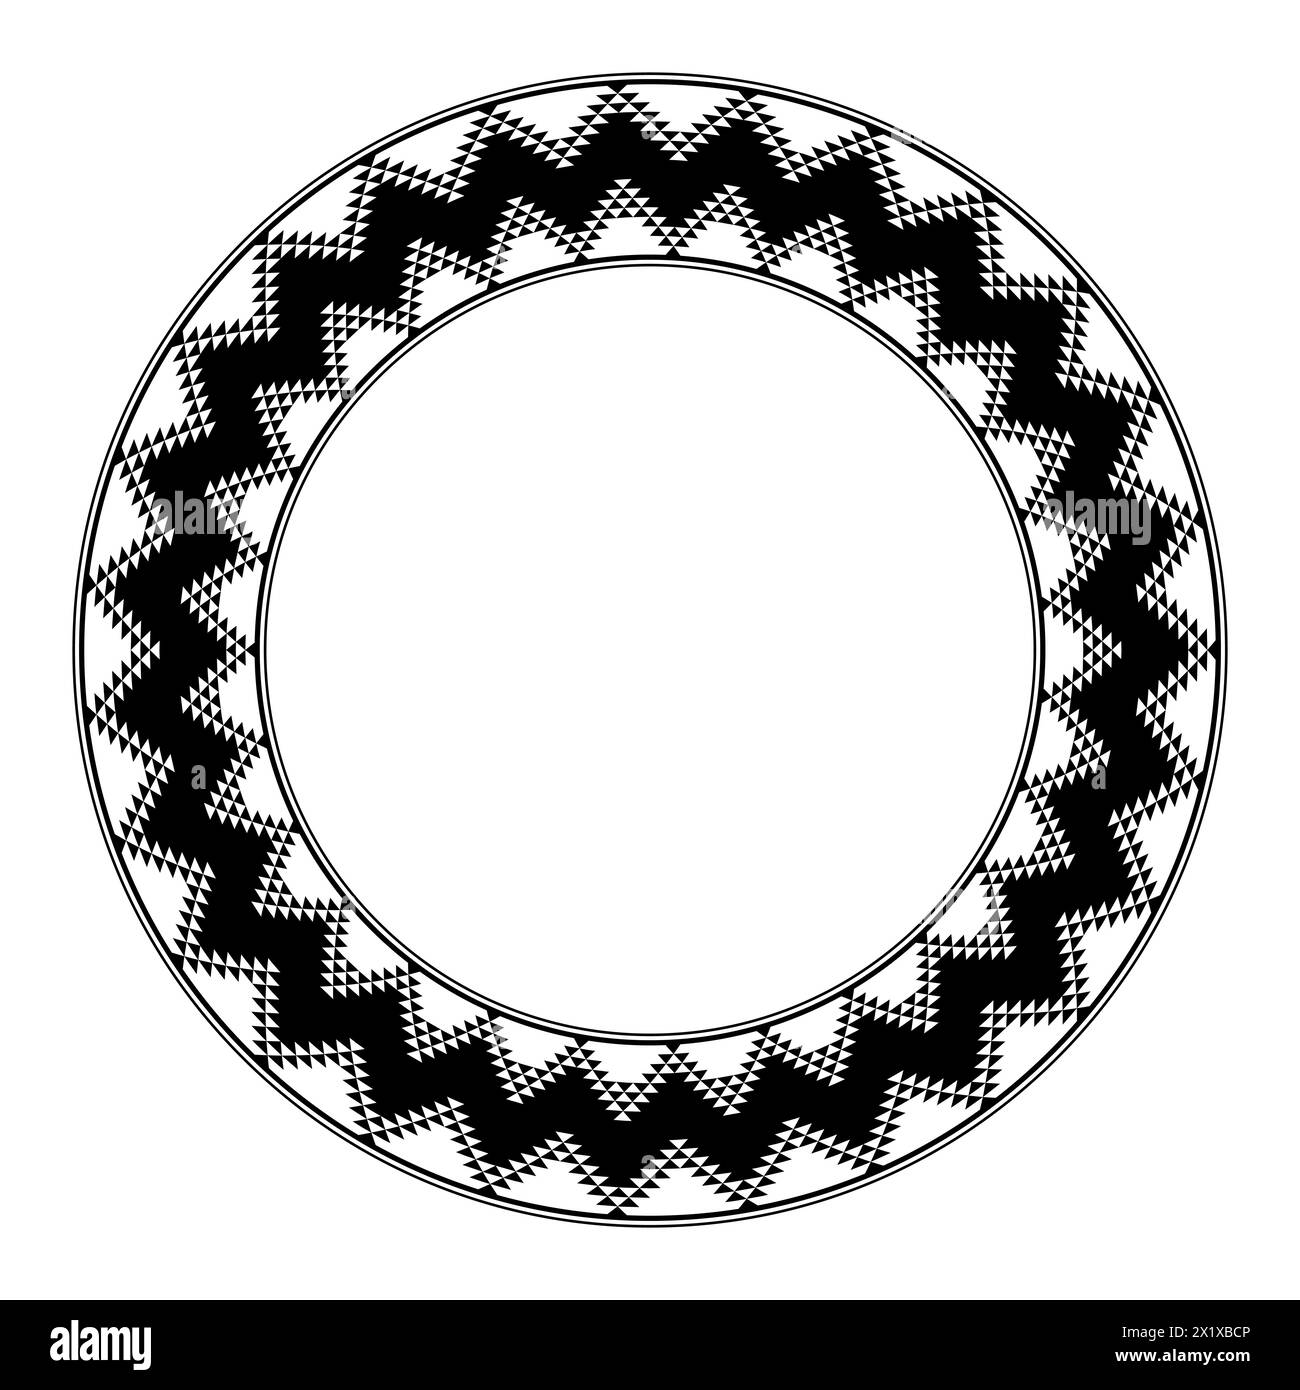 Anasazi pattern, circle frame. Decorative border the typical design of the Ancestral Puebloans, a Native American culture. Stock Photo